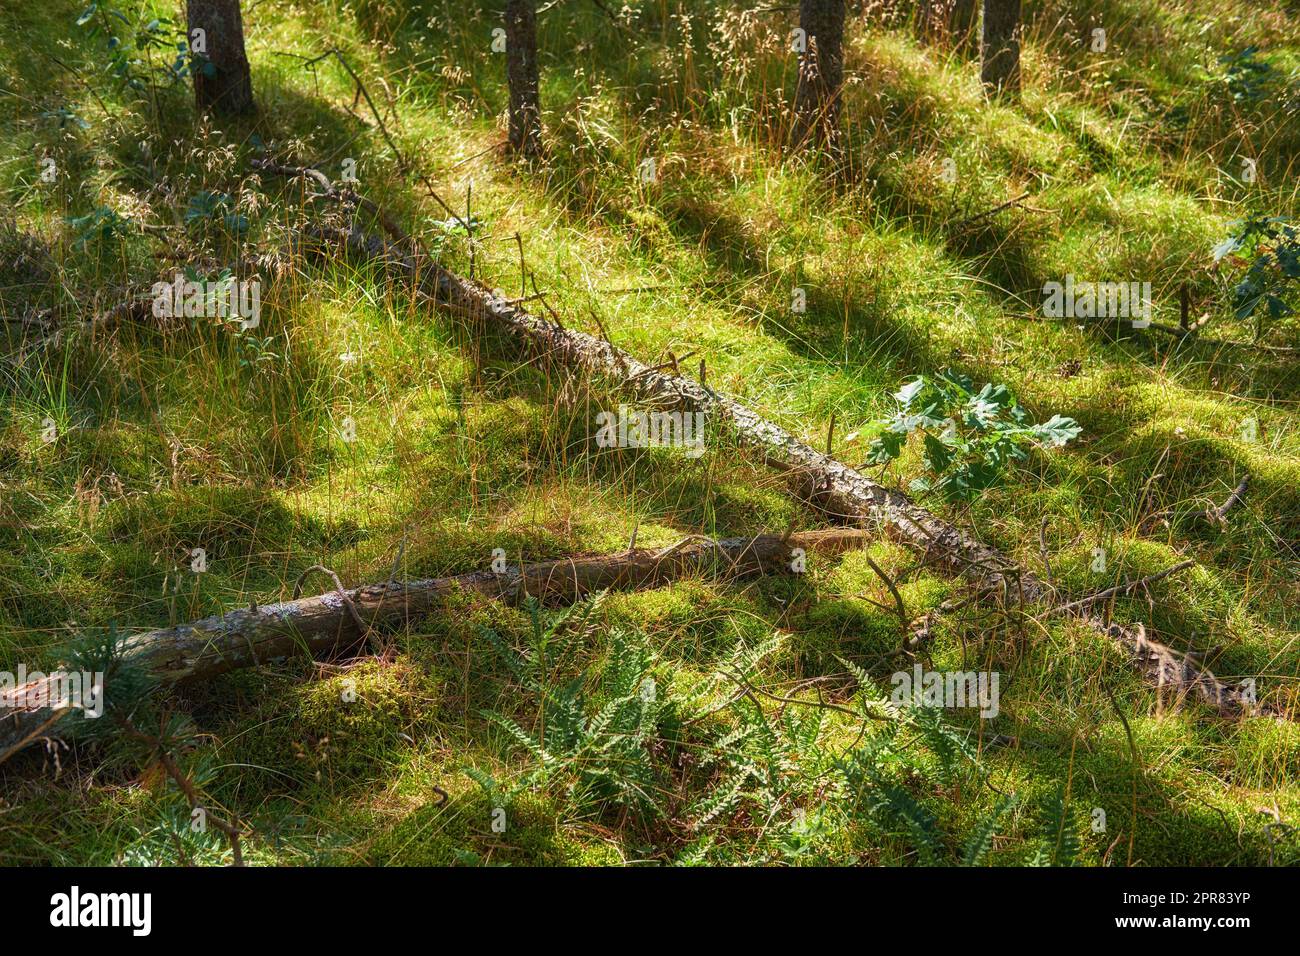 Landscape scene through the rural woodland forest in spring. View of fallen tree trunks lying on overgrown grass in the woods in Denmark. Bushy plants and thin tree trunks. of Nature background Stock Photo